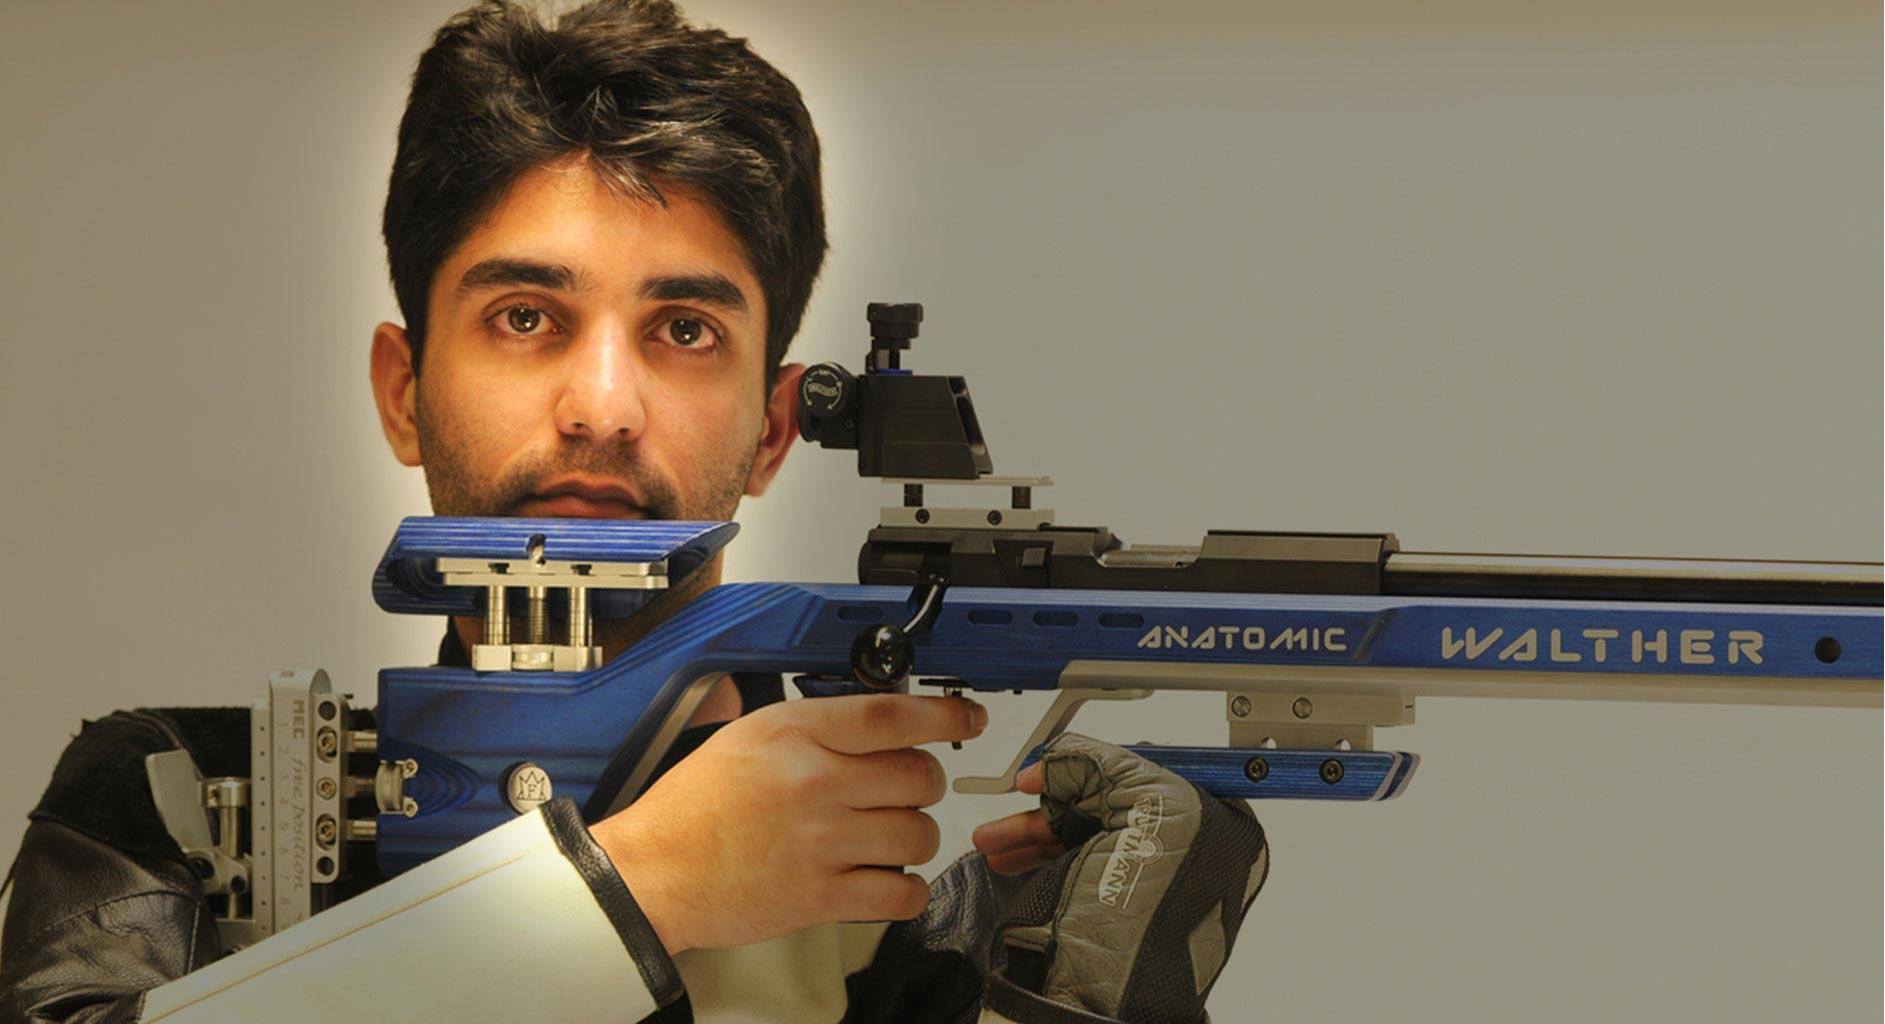 Rio 2016 | Equipment failure may have played a part in Abhinav Bindra’s final heartbreak